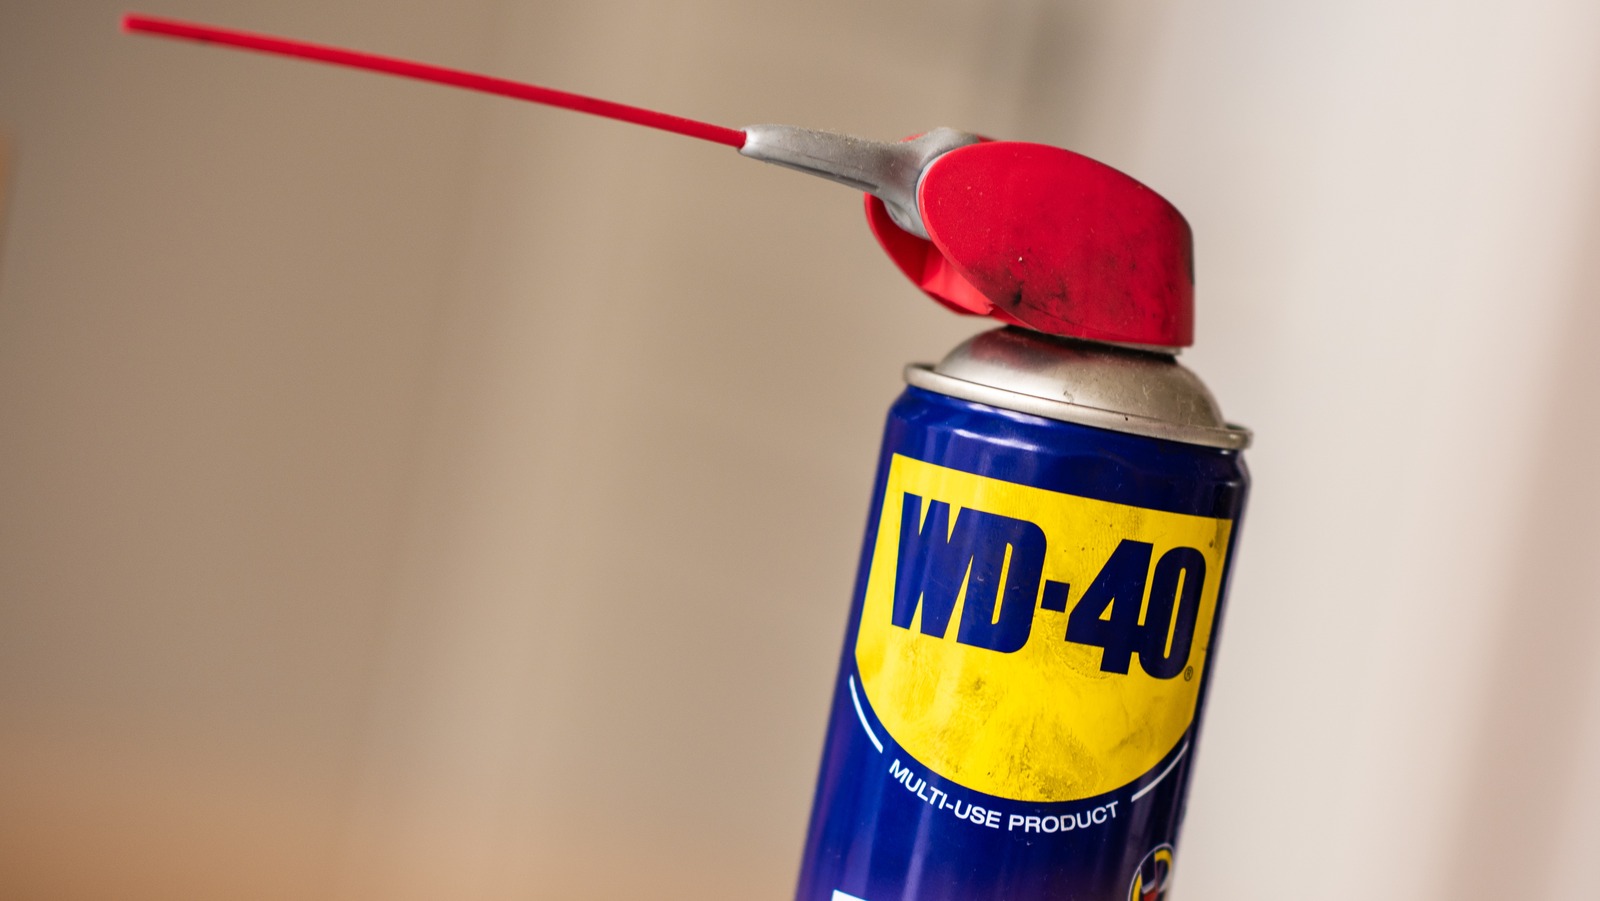 WARNING WD-40 silicone remover FAIL 